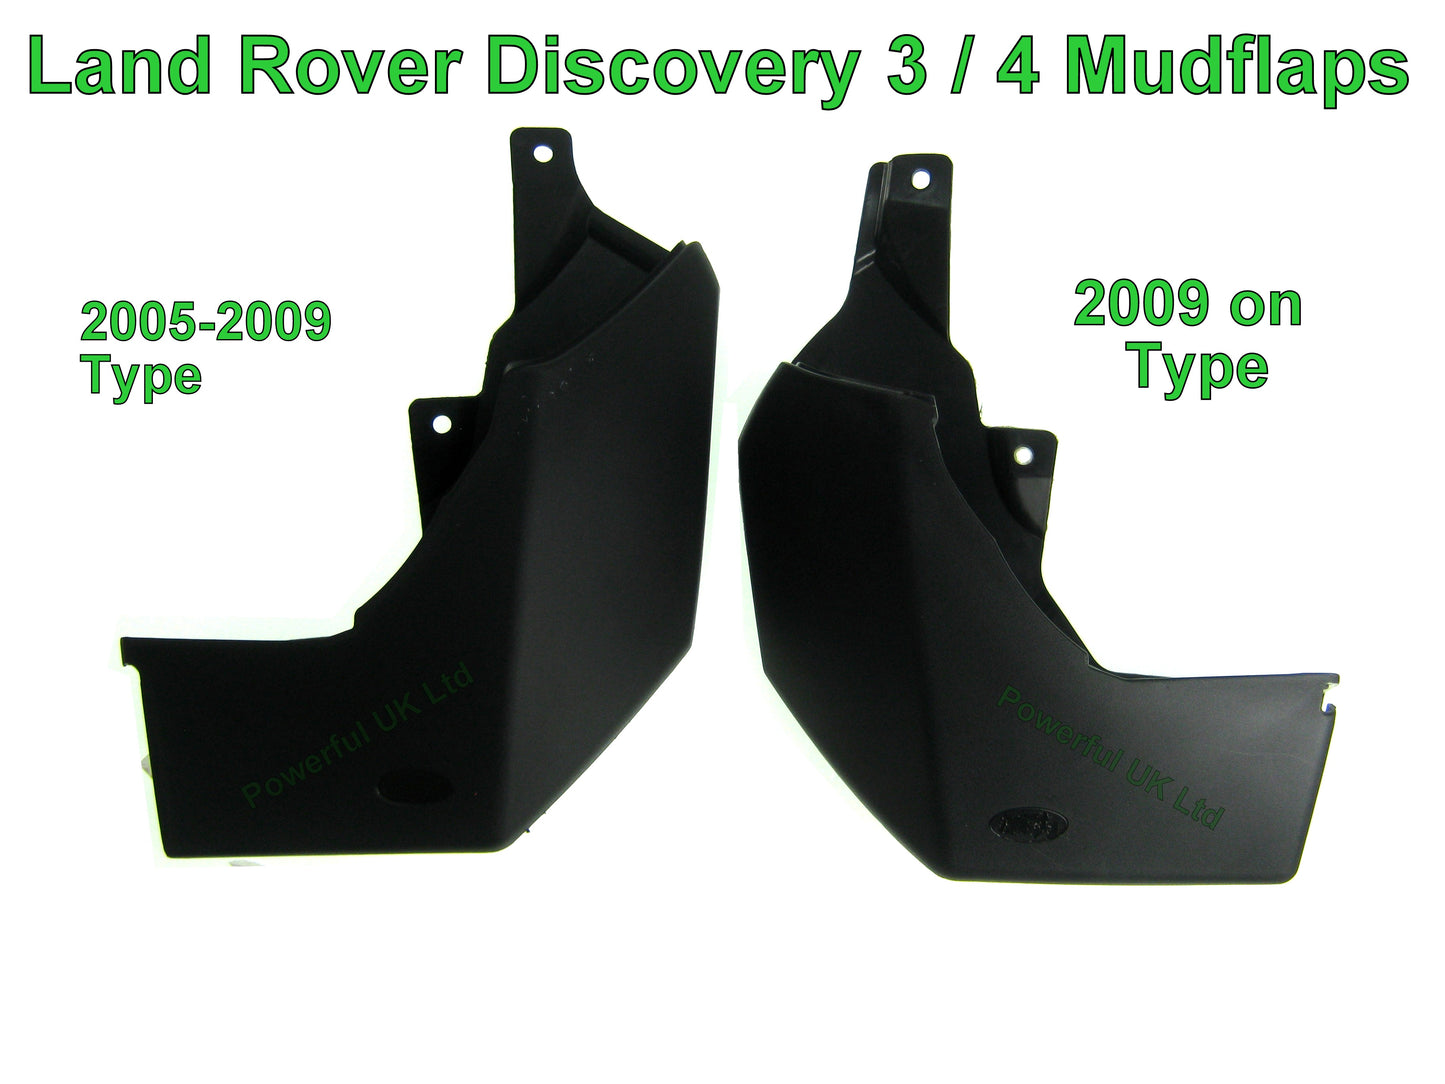 Mudflap kit - Rear - for Land Rover Discovery 4